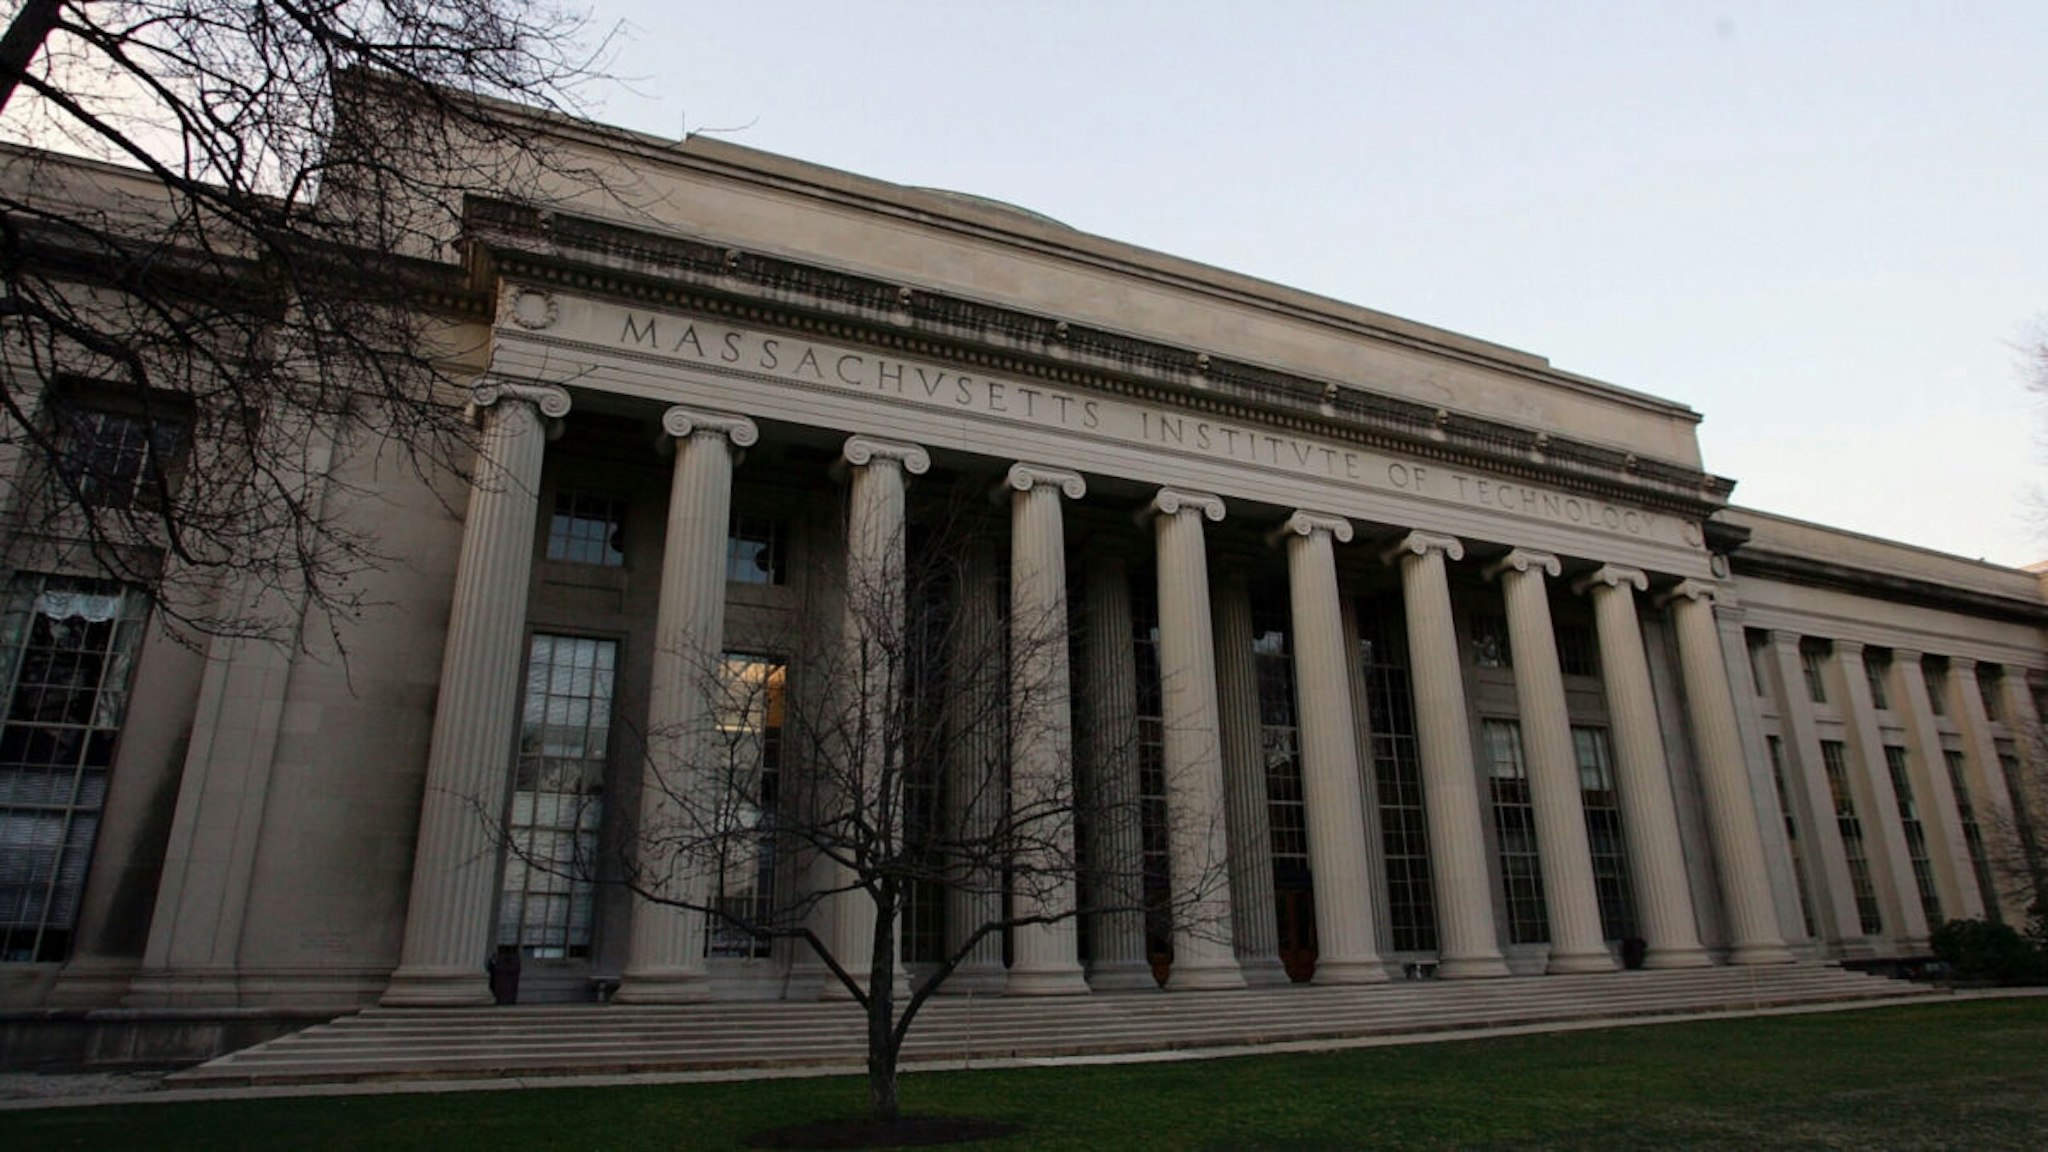 The Maclaurin Building is shown on the campus of the Massachusetts Institute of Technology February 22, 2006 in Cambridge, Massachusetts.